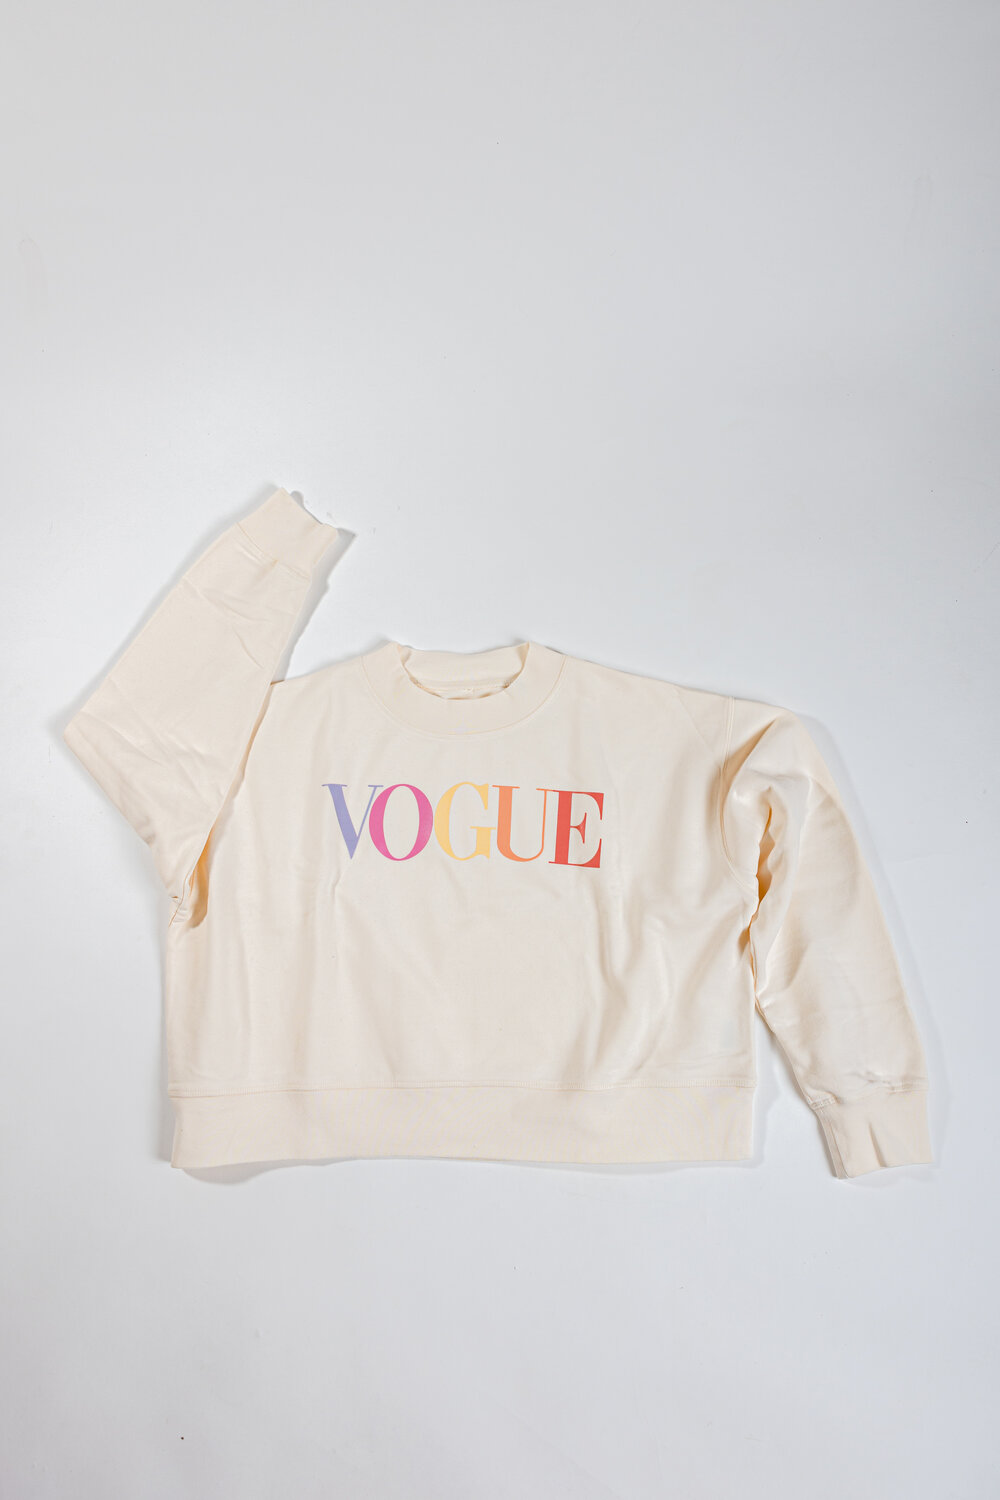 VOGUE Cropped Sweater, Gr. L